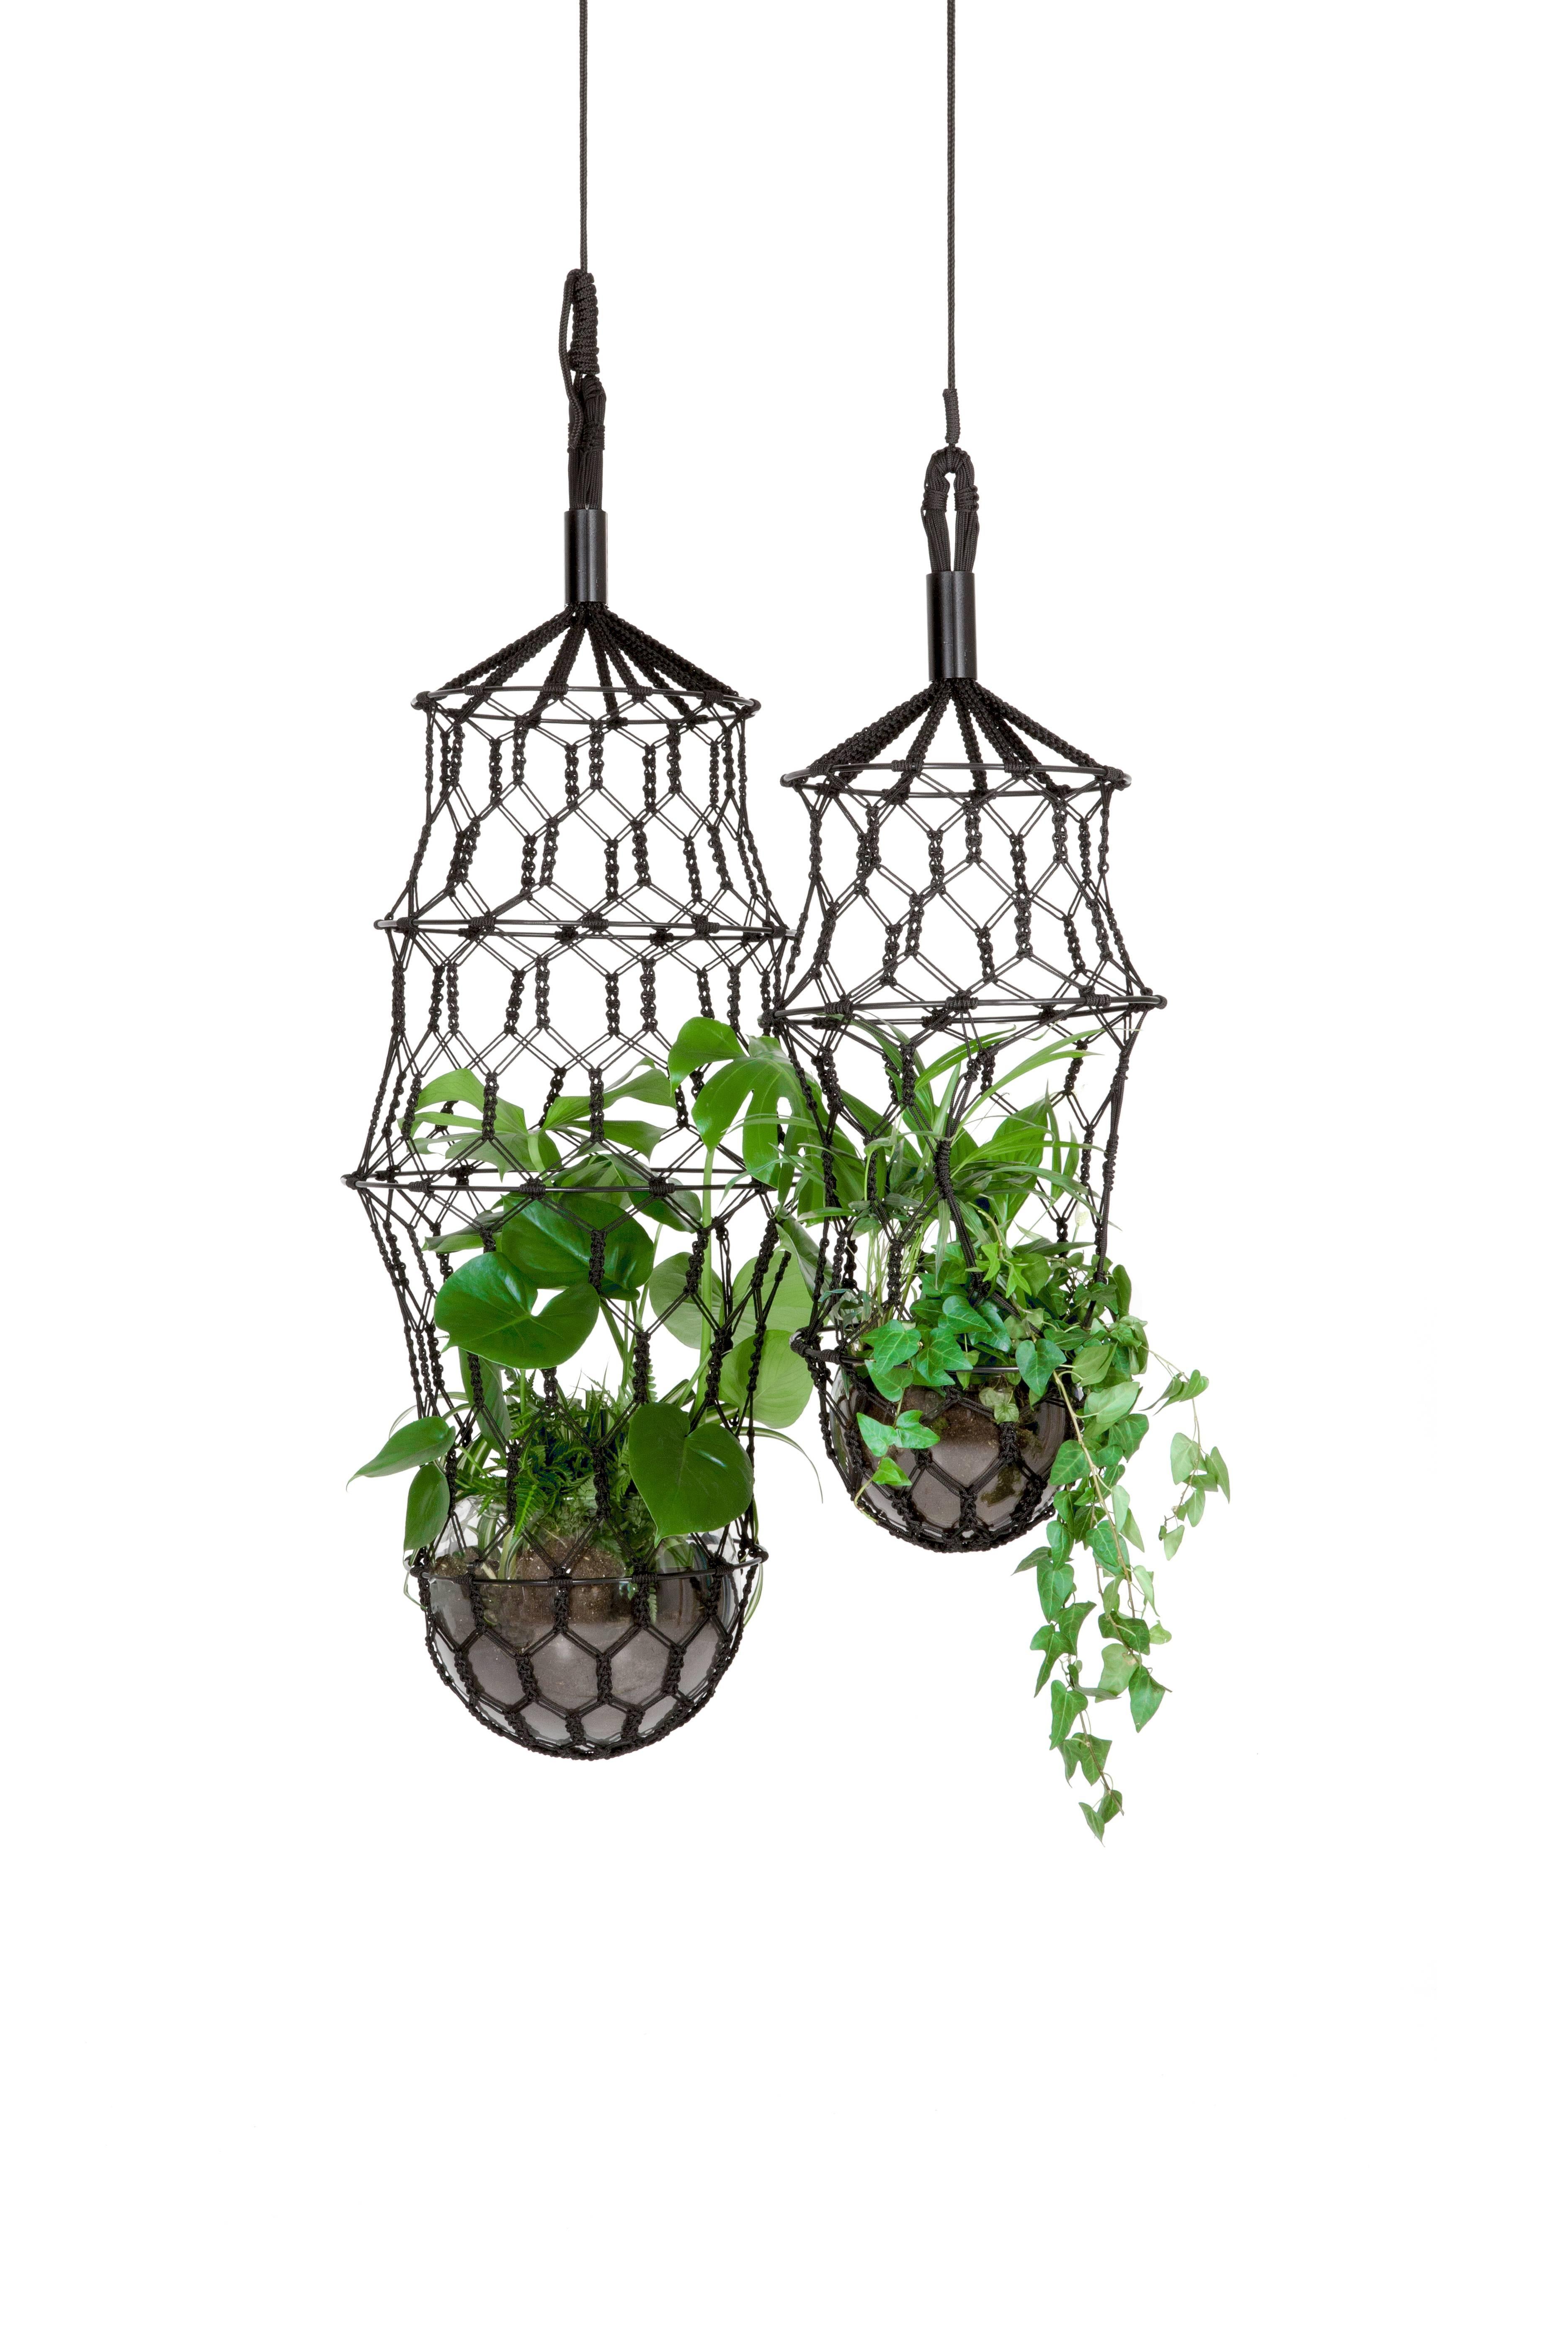 Blackened 21st Century Contemporary Design, Macramé Minimal Lucille Flower Cocoon in Black For Sale